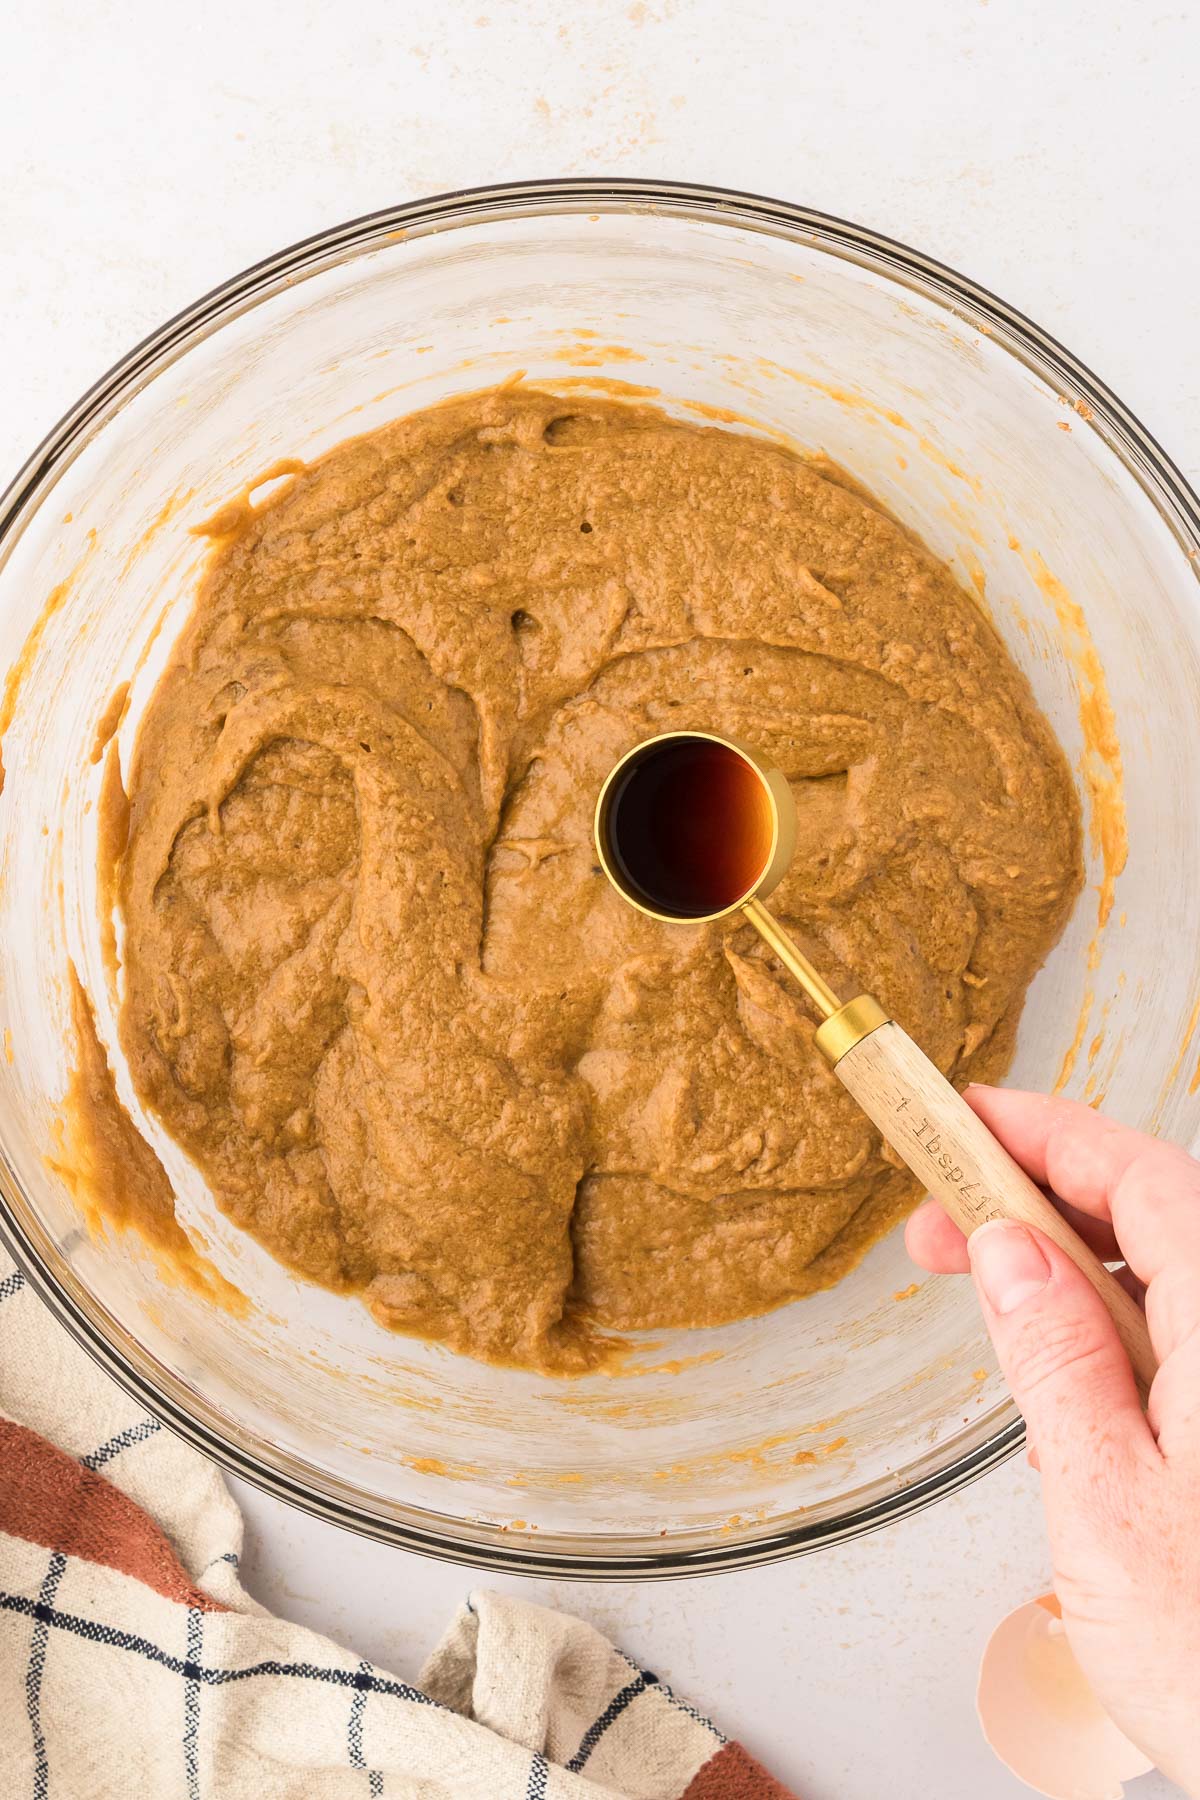 A woman's hand adding a measuring spoon of vanilla extract to a bowl with cookie dough.